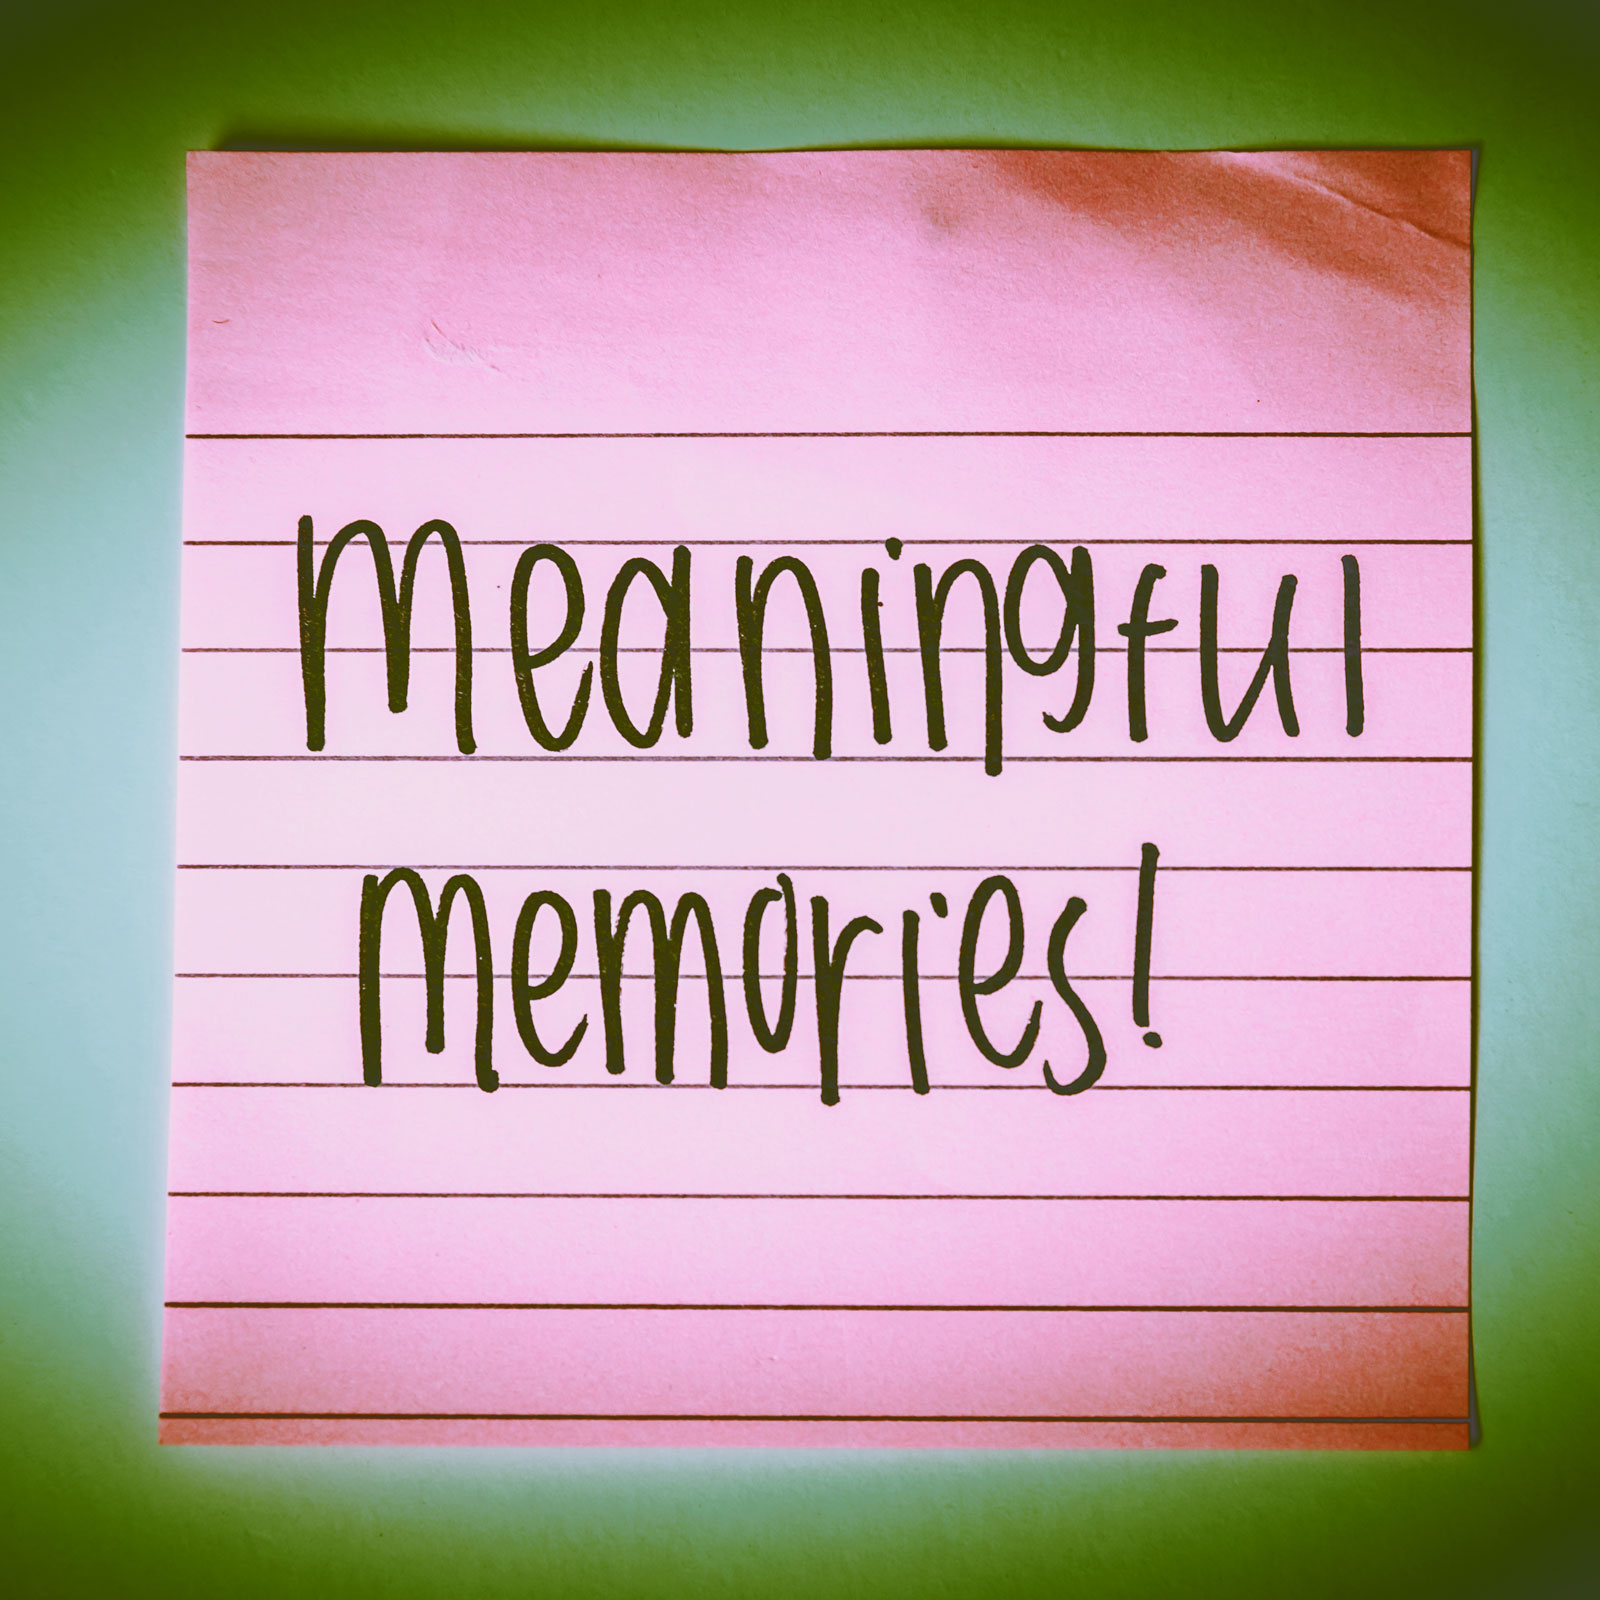 Meanginful memories